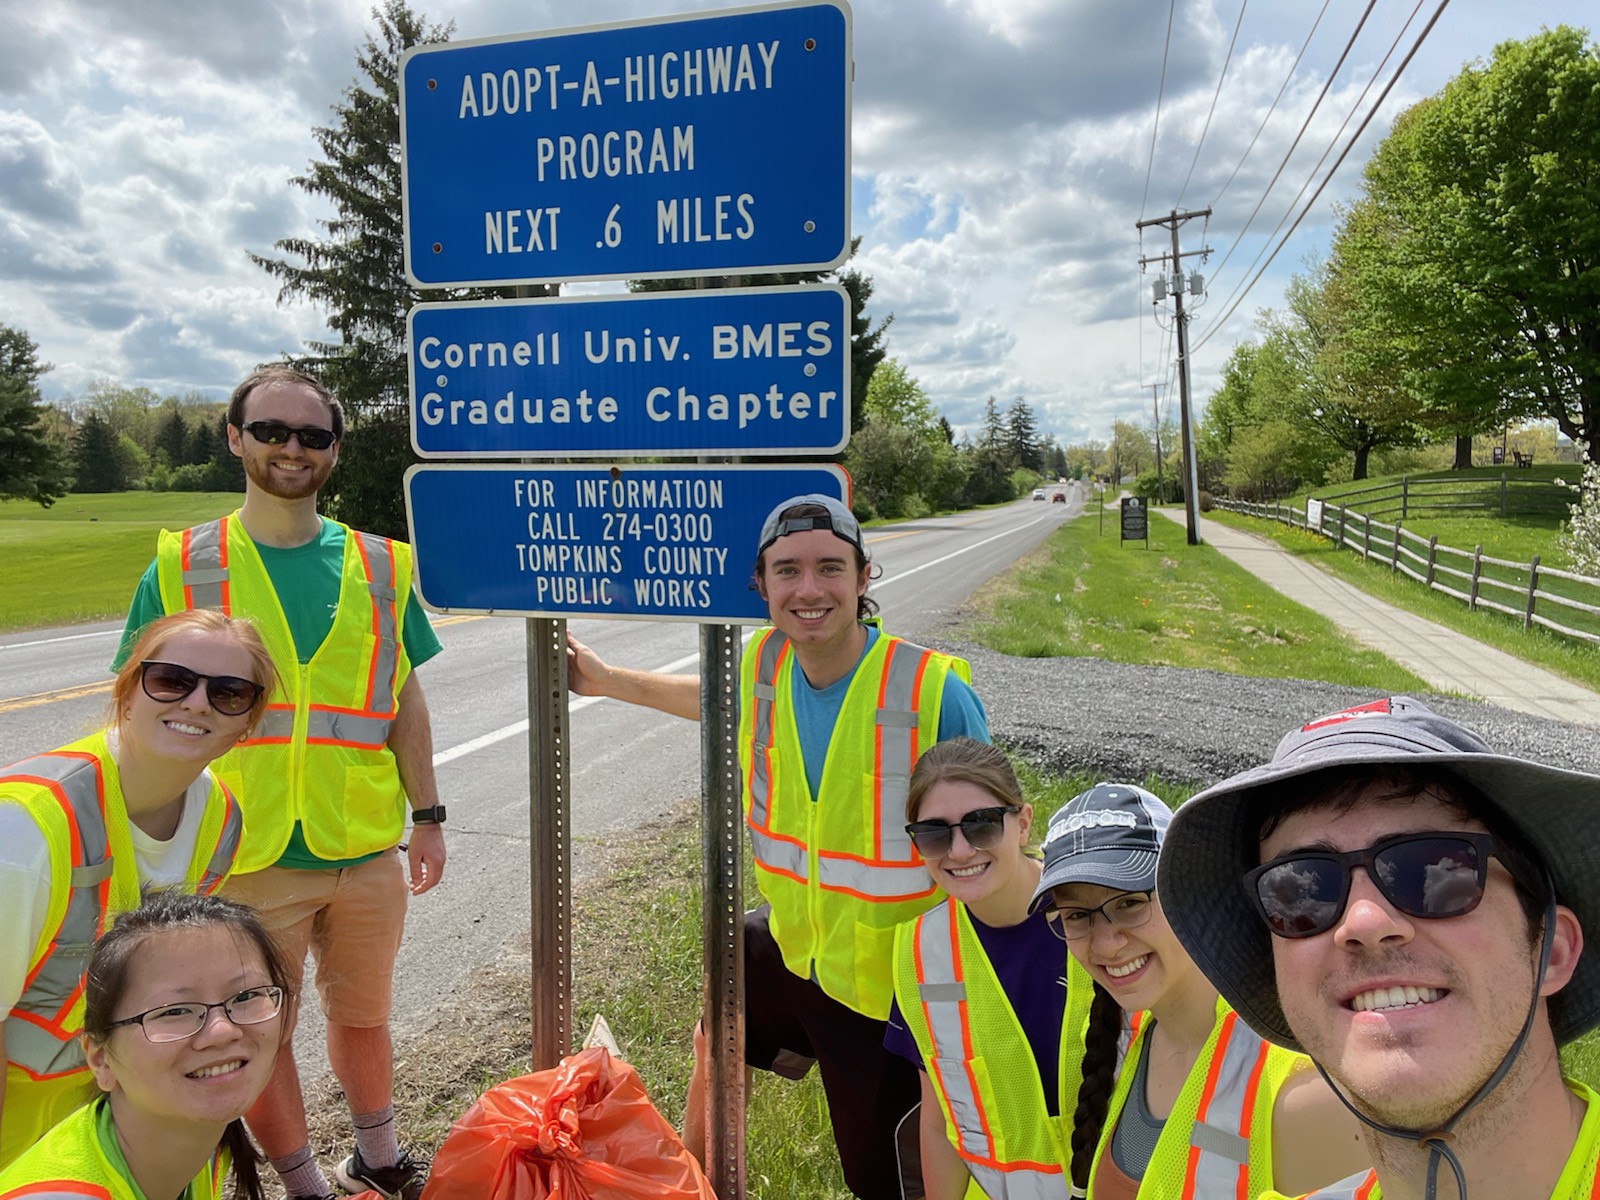 Highway clean-up community service.